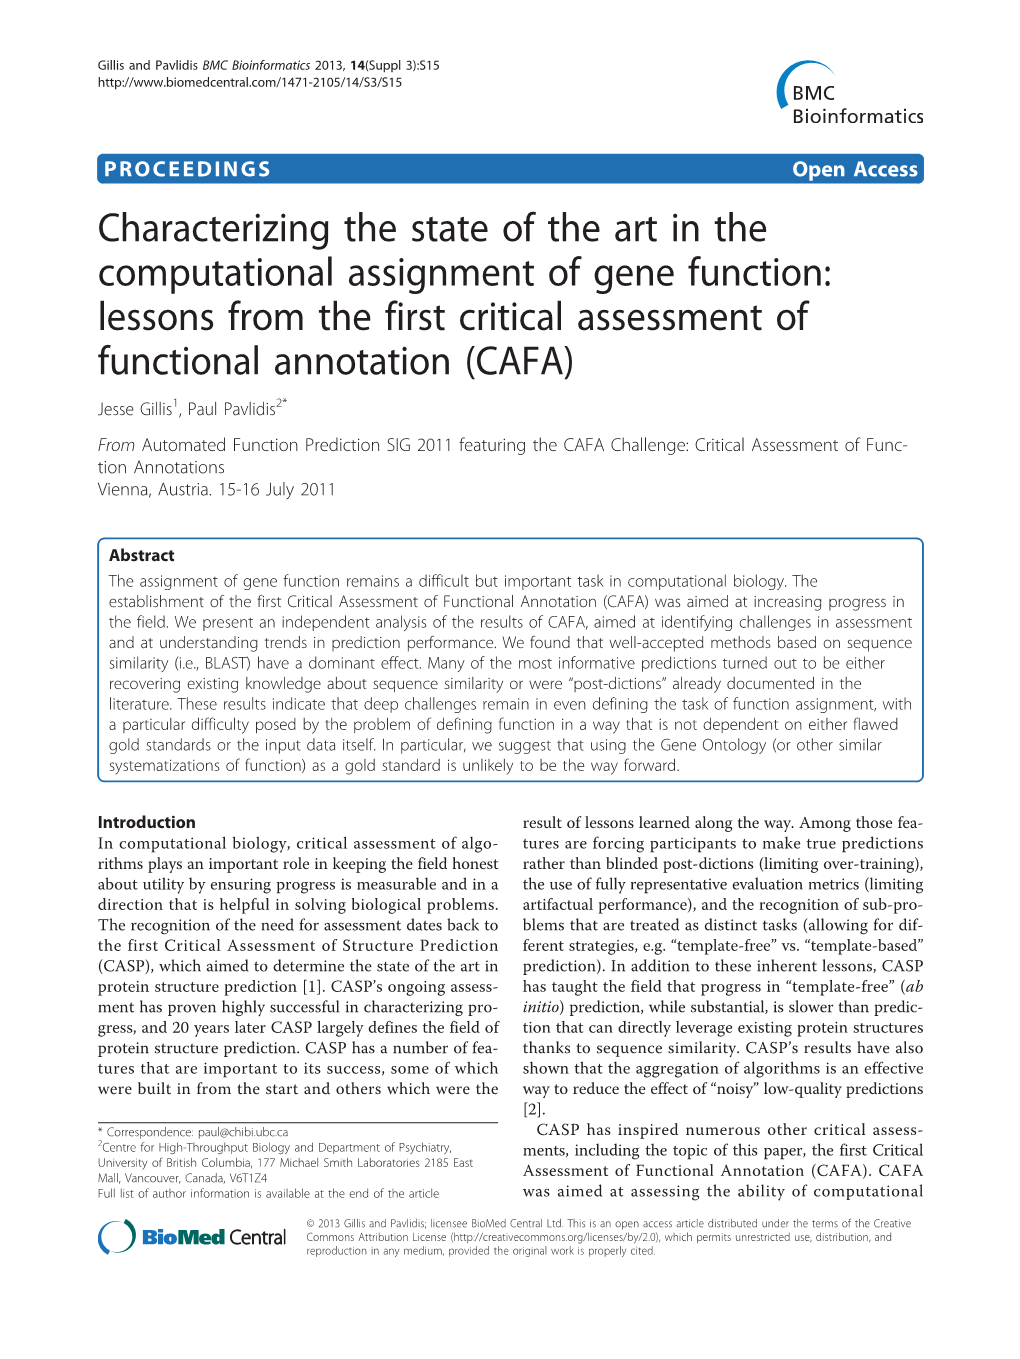 Lessons from the First Critical Assessment of Functional Annotation